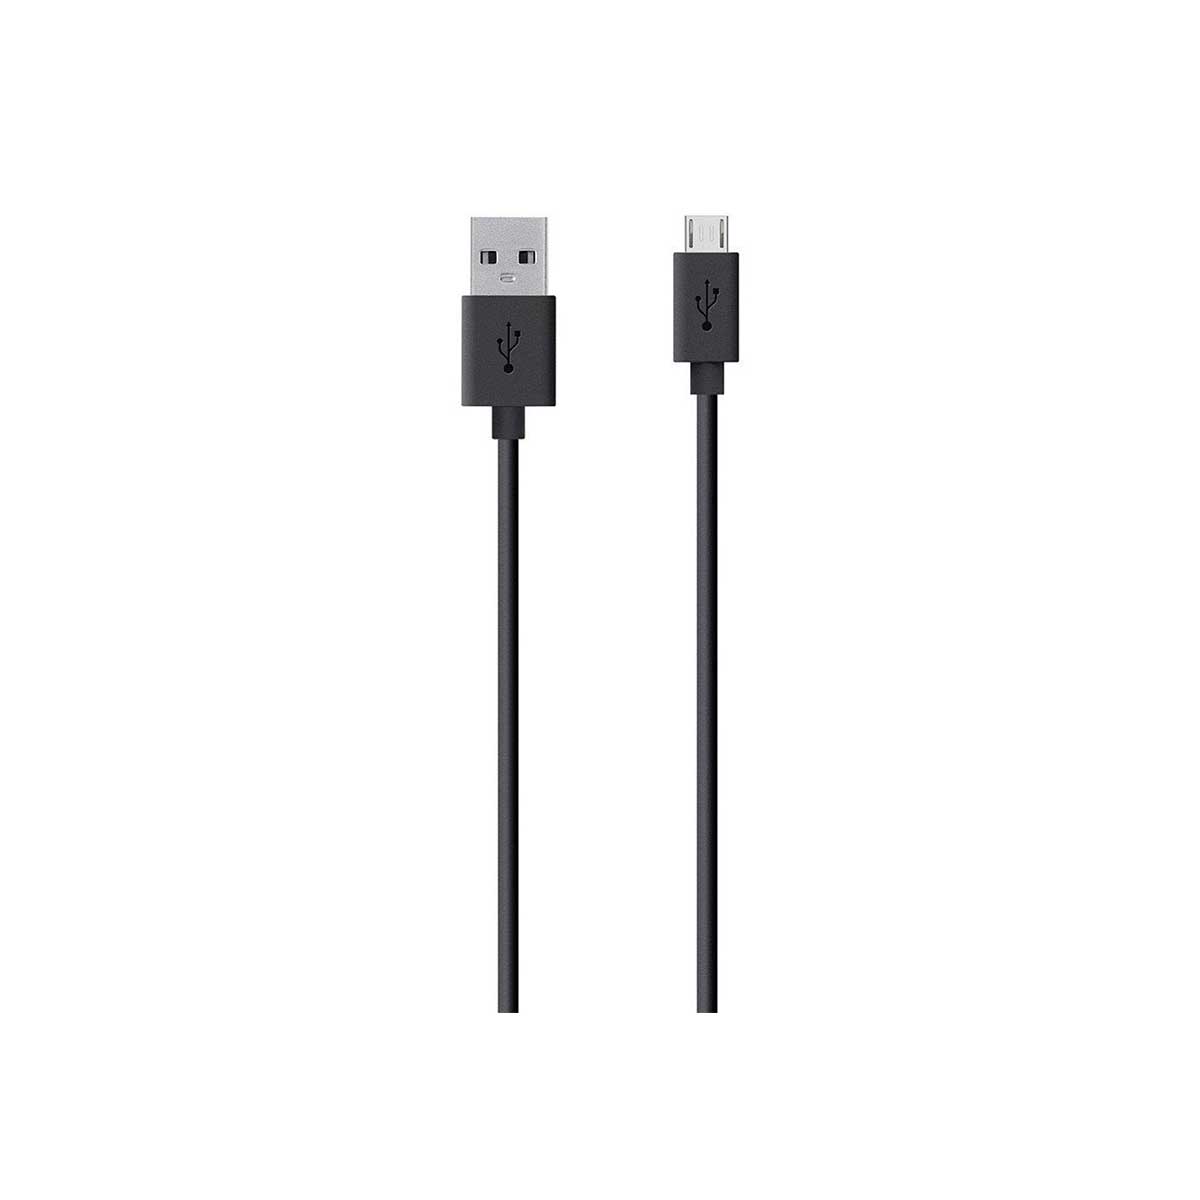 Belkin MIXIT Black Micro-USB to USB ChargeSync Cable